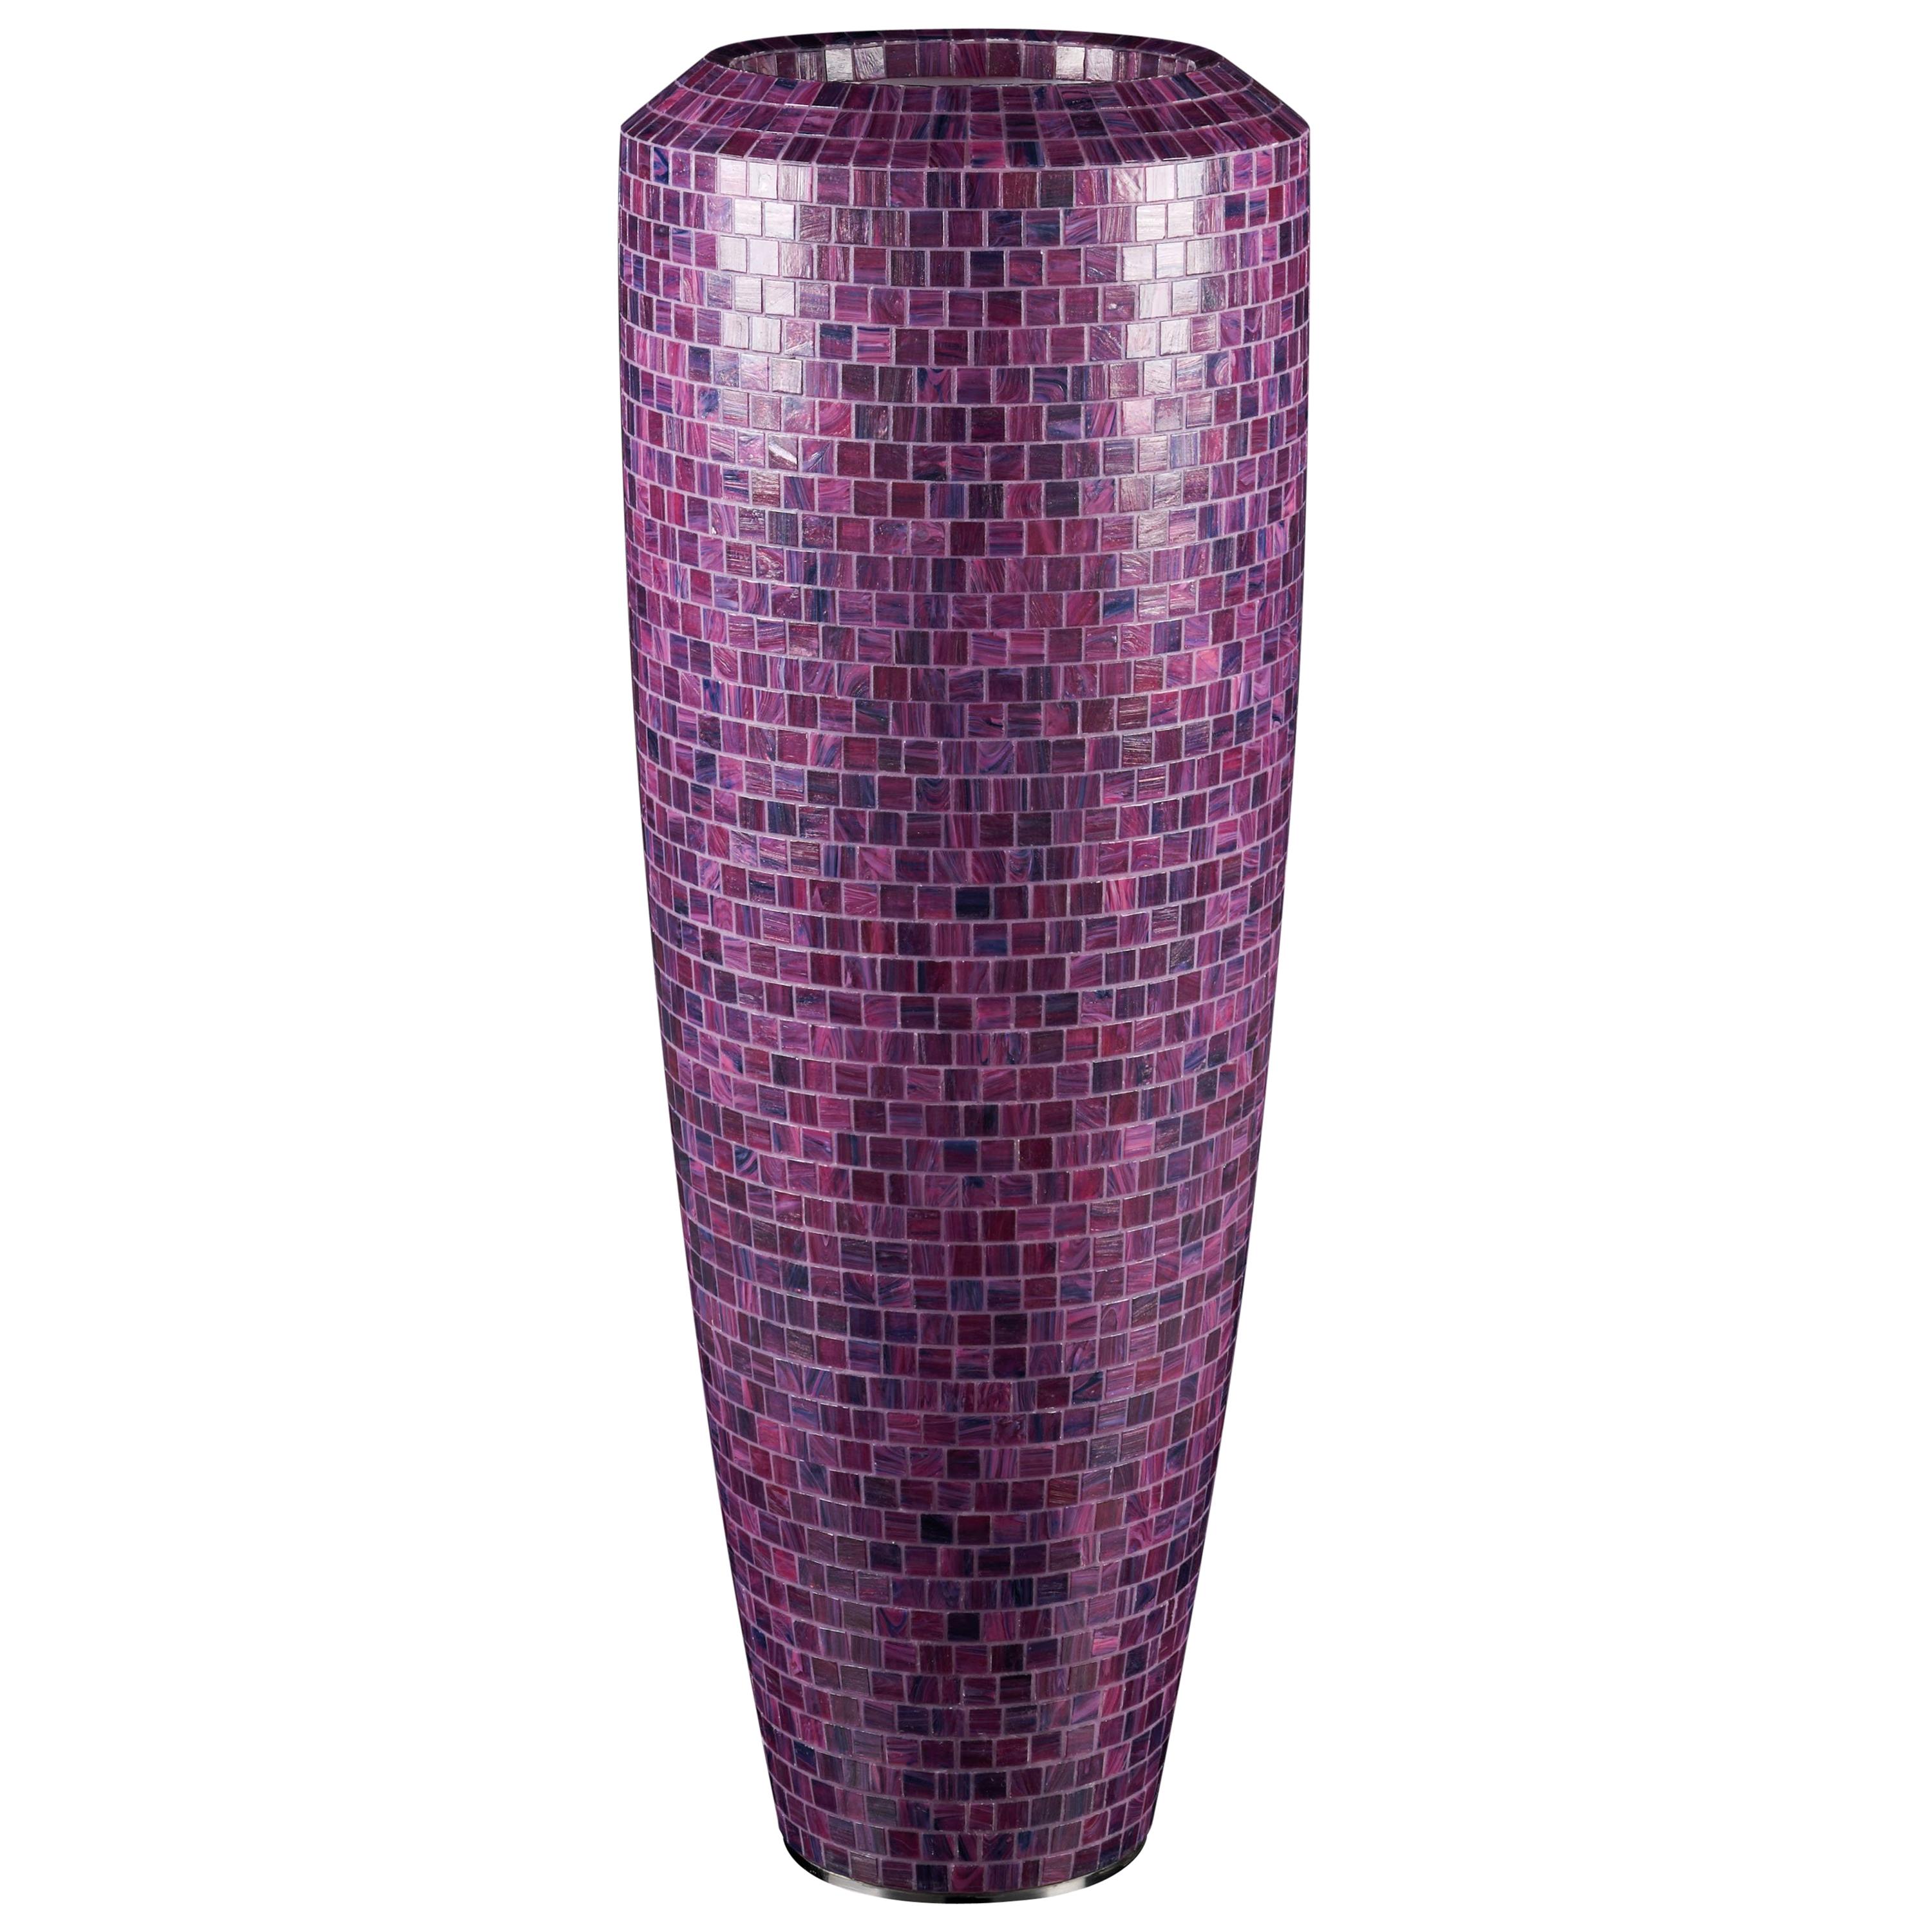 Obice Small Vase, LDPE, Indoor, Bisazza Mosaic, Italy For Sale